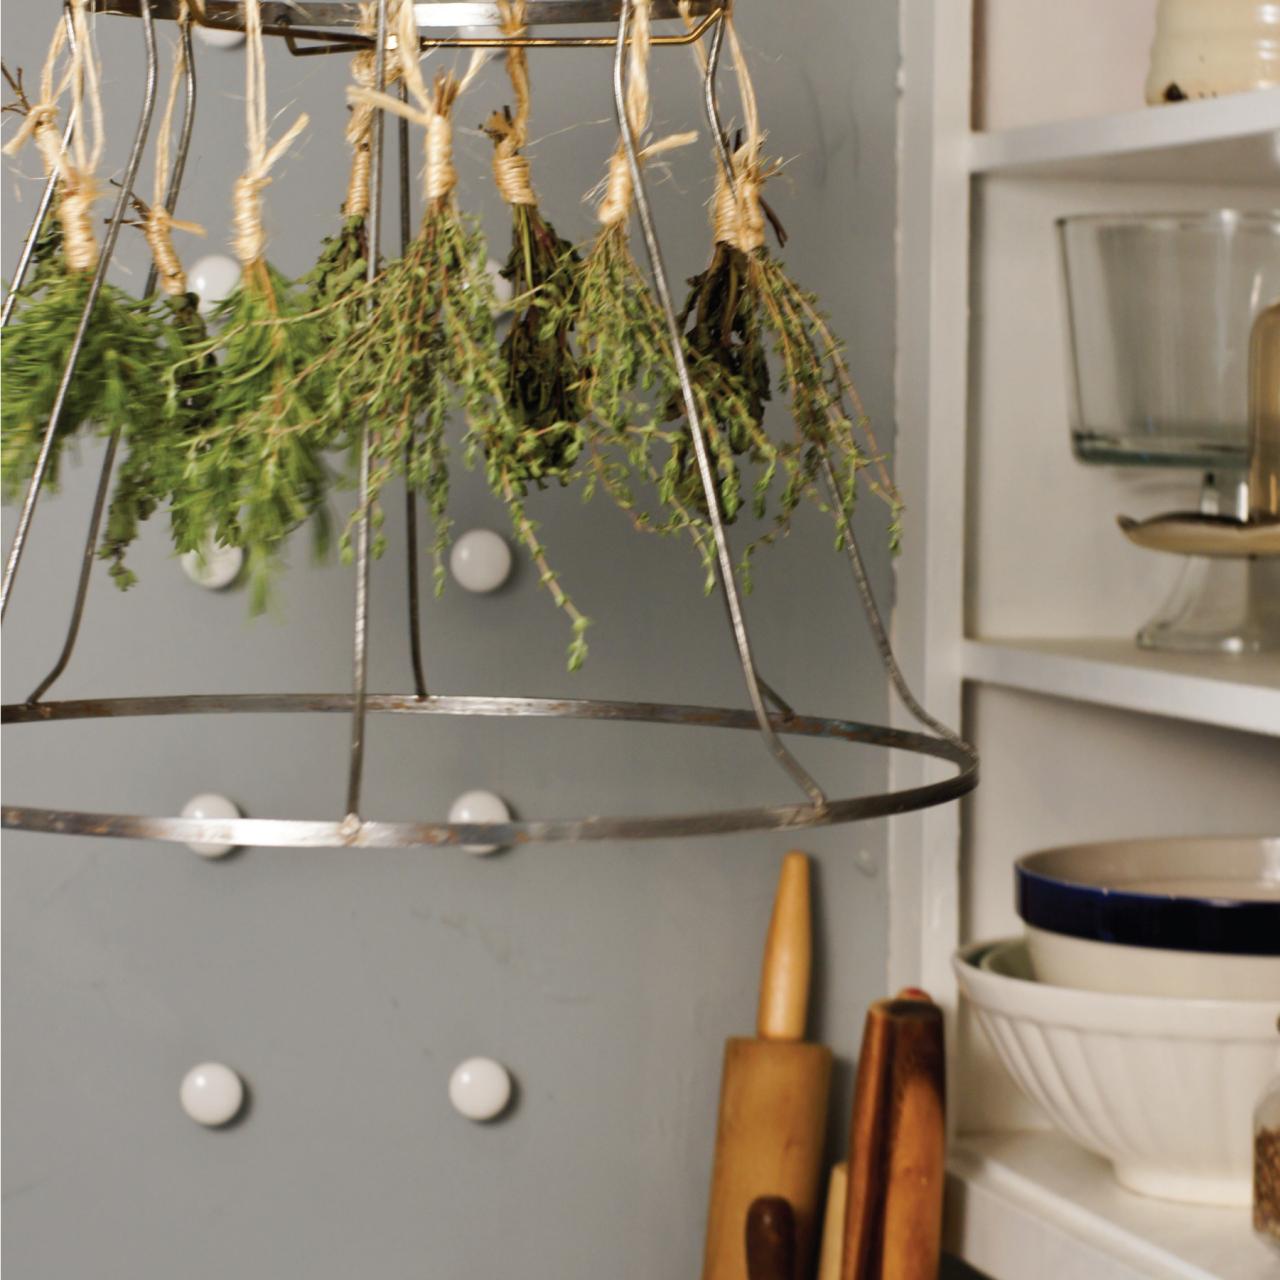 Upcycled Herb Drying Rack - Domestically Creative